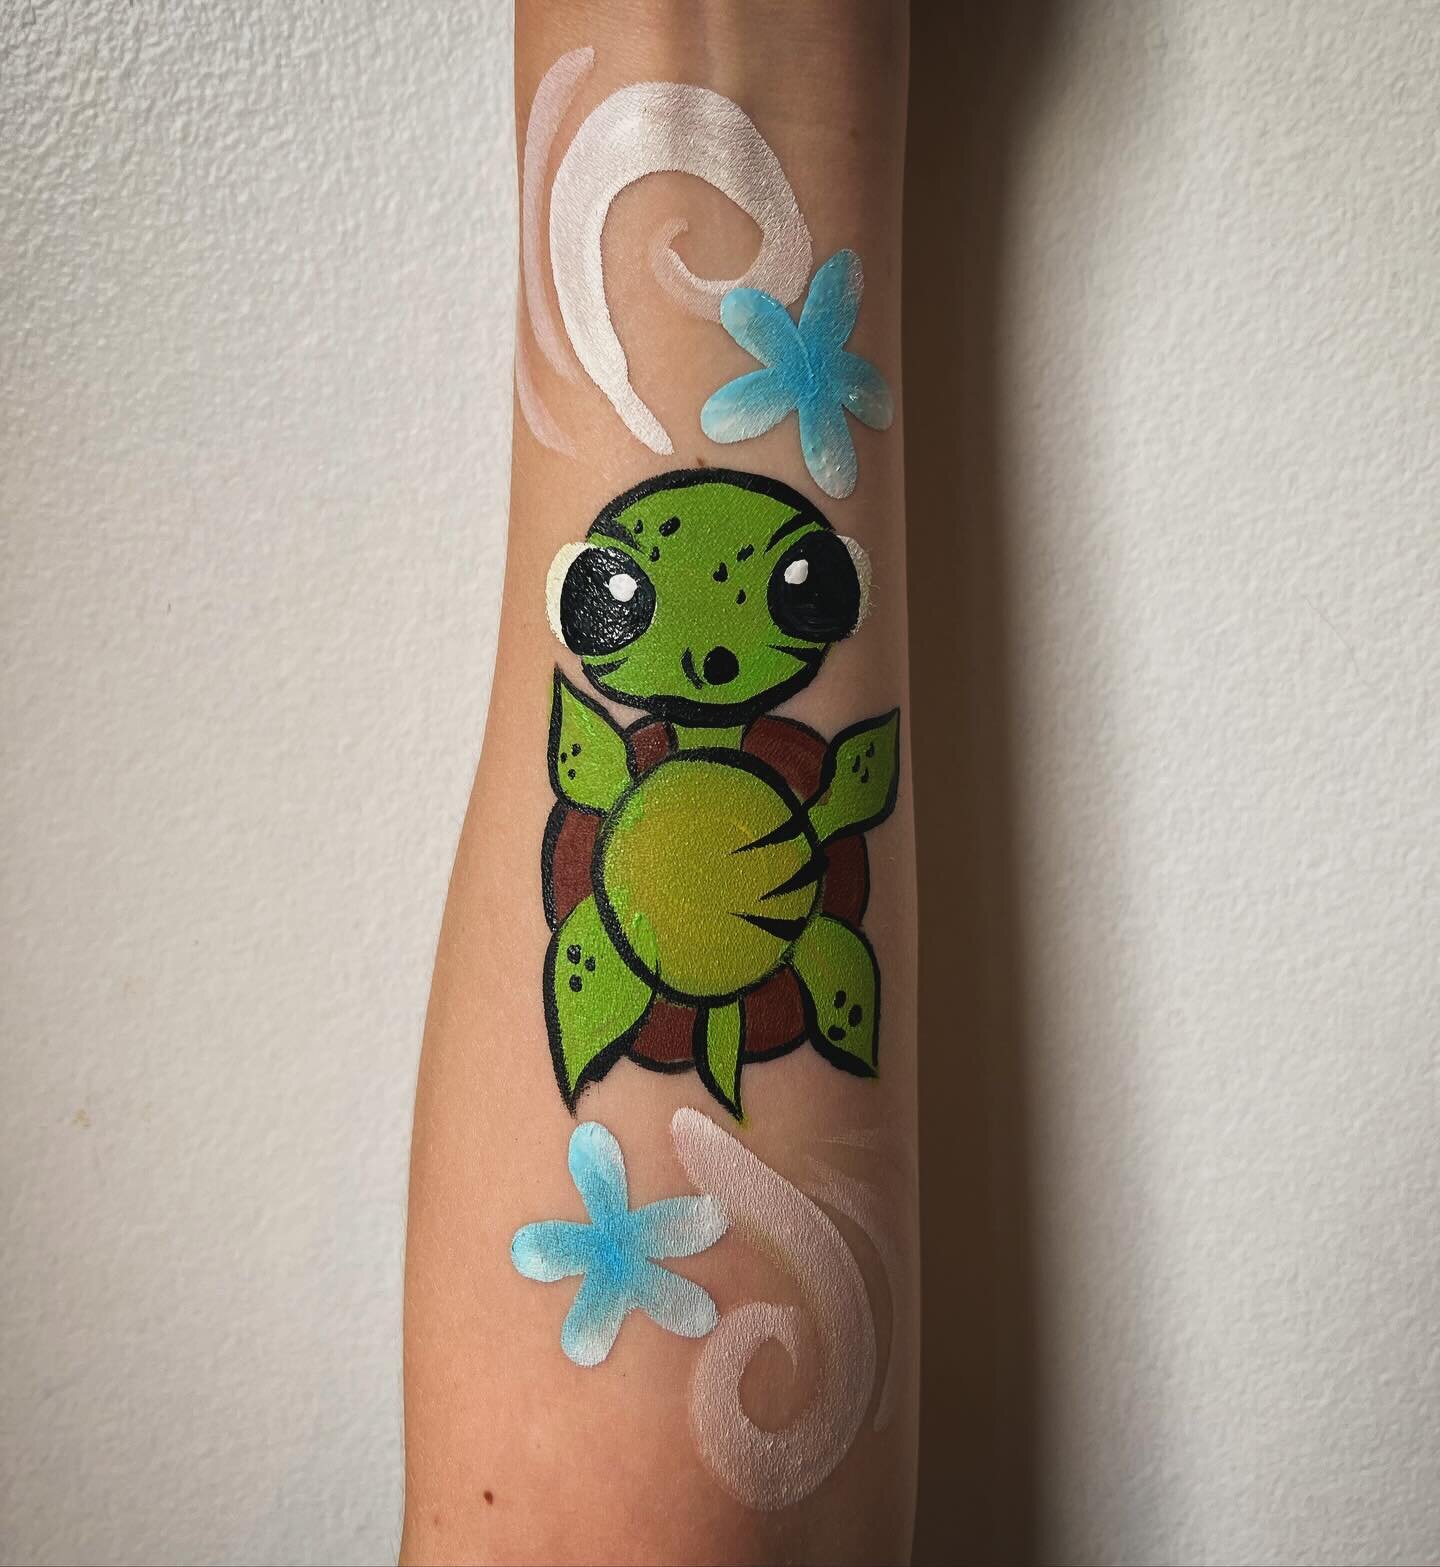 Fin, noggin, duuude.

Did you know our paints go on both your face and arms? We know not every little one likes their face touched, so we make sure to cater to their needs. Without excluding them from a fun colorful painting!

#facepainting #art #art